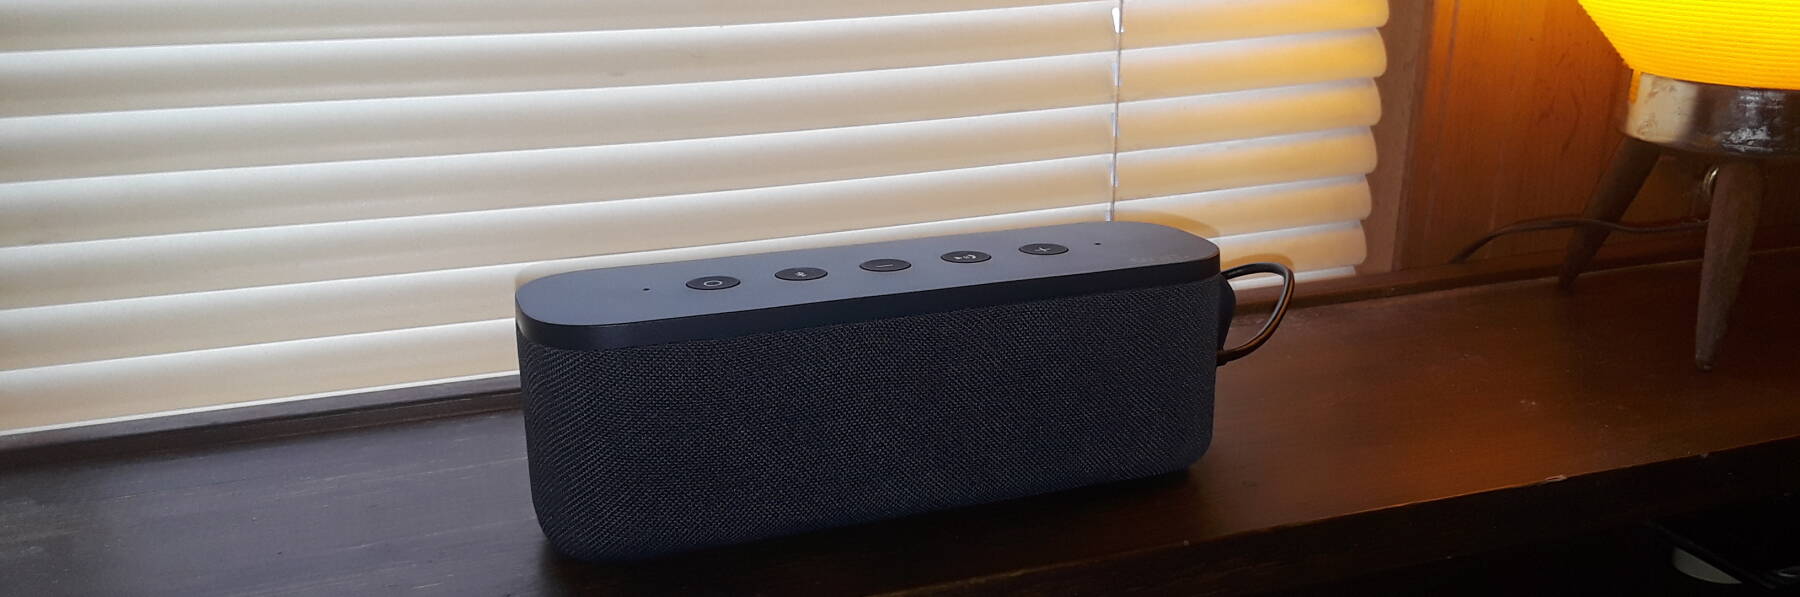 Bluetooth speakers connected to Linux.